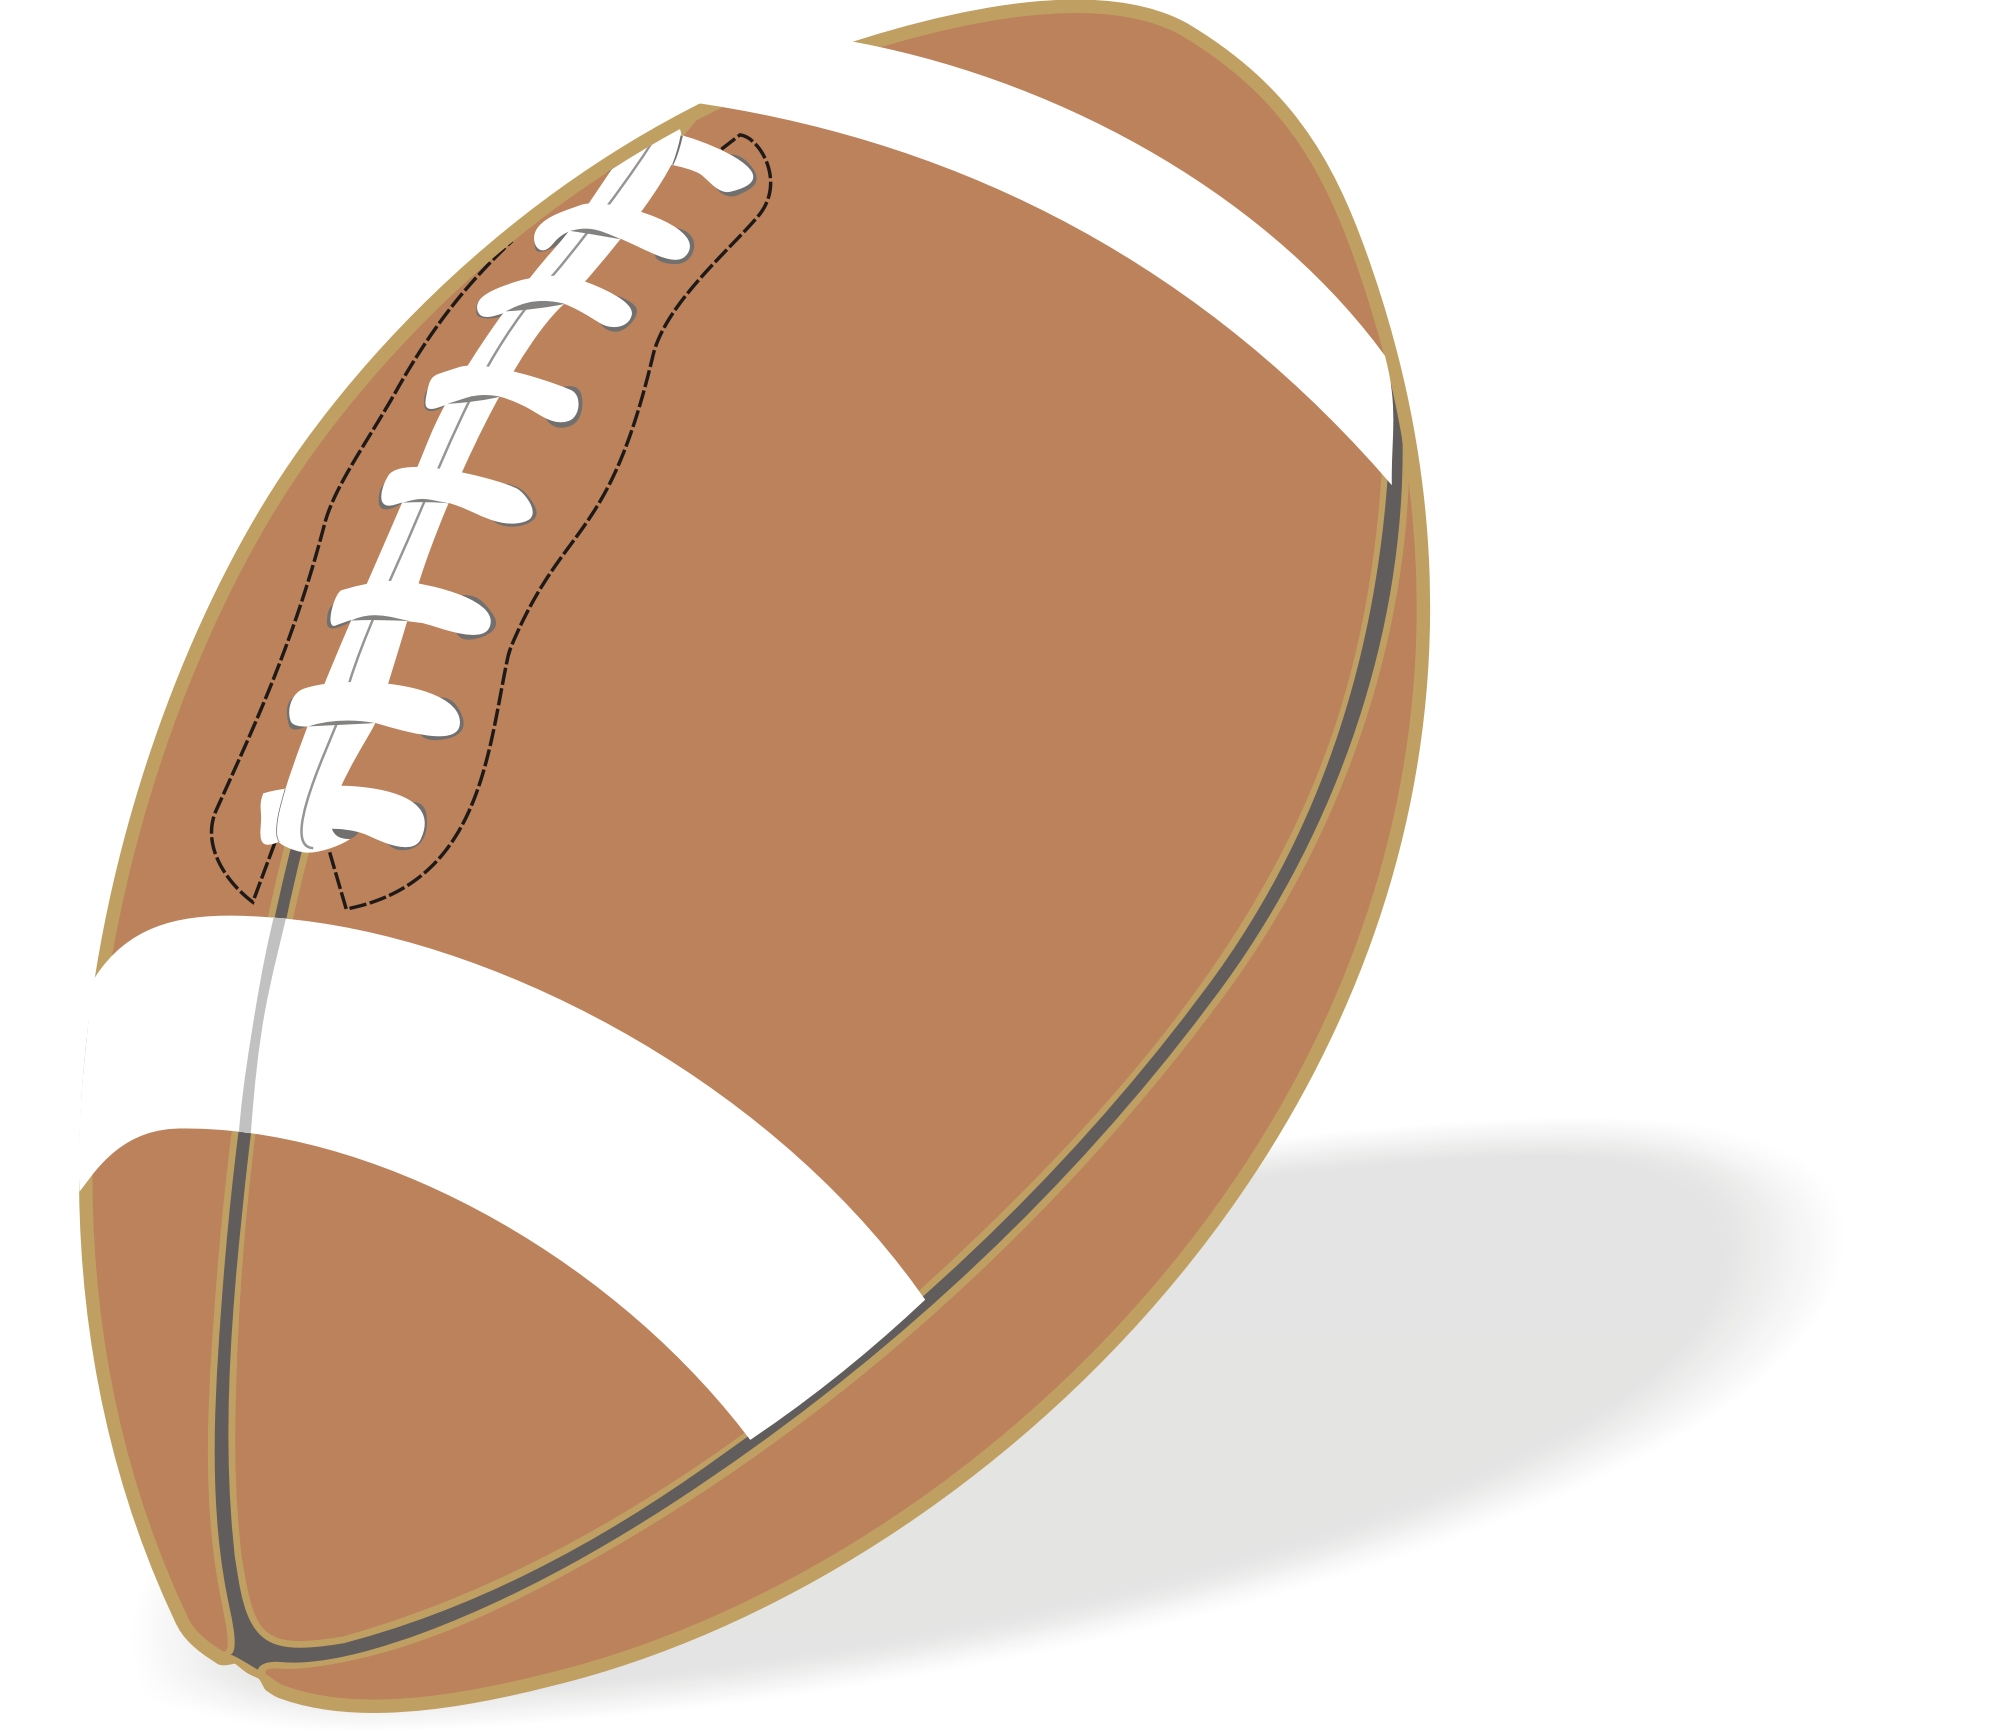 Football Free Images At Clker - Free Football Clip Art